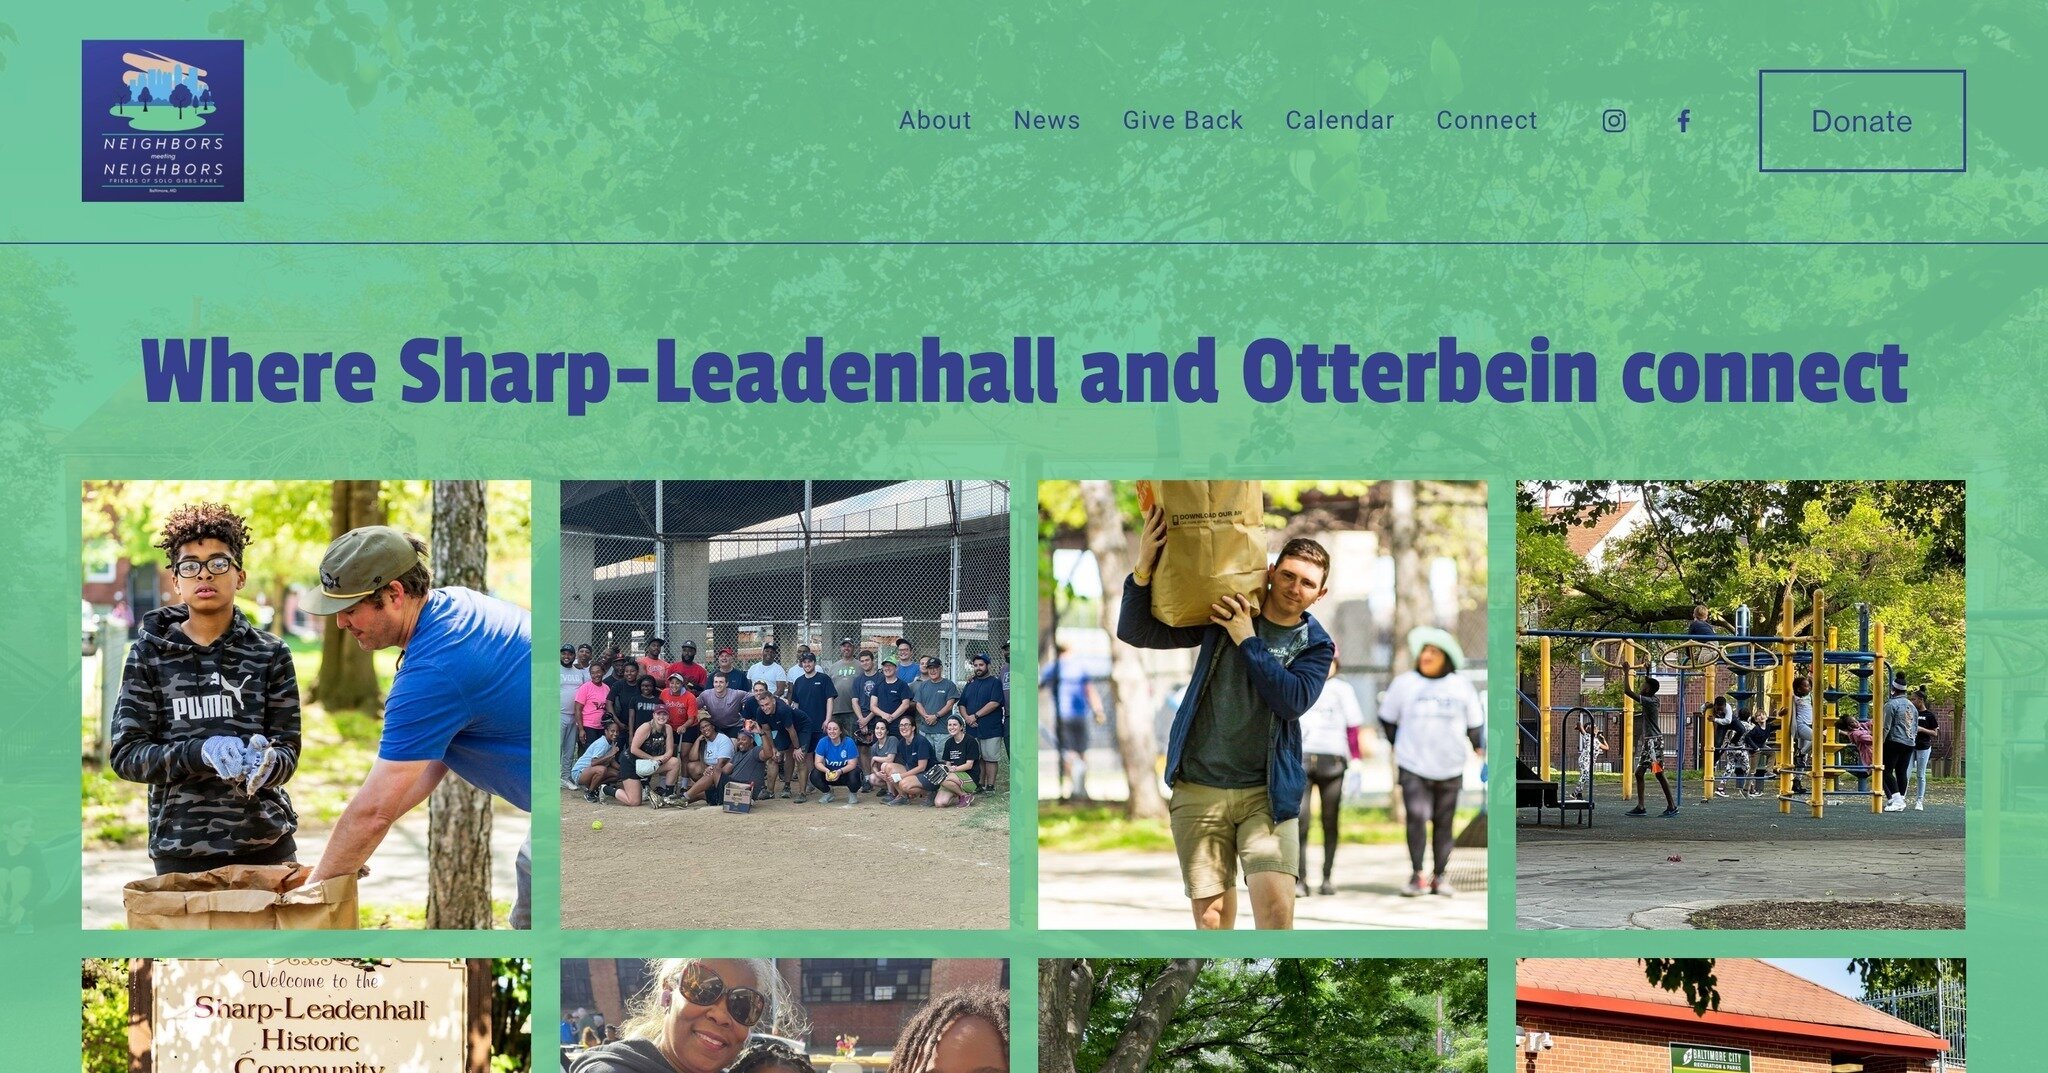 I had such a blast creating the brand-new website for @neighborsmeetingneighbors! What a great organization with wonderful people - we're so lucky to have them in our neighborhood. It was fun to take their hopes for a simple, direct, and engaging web